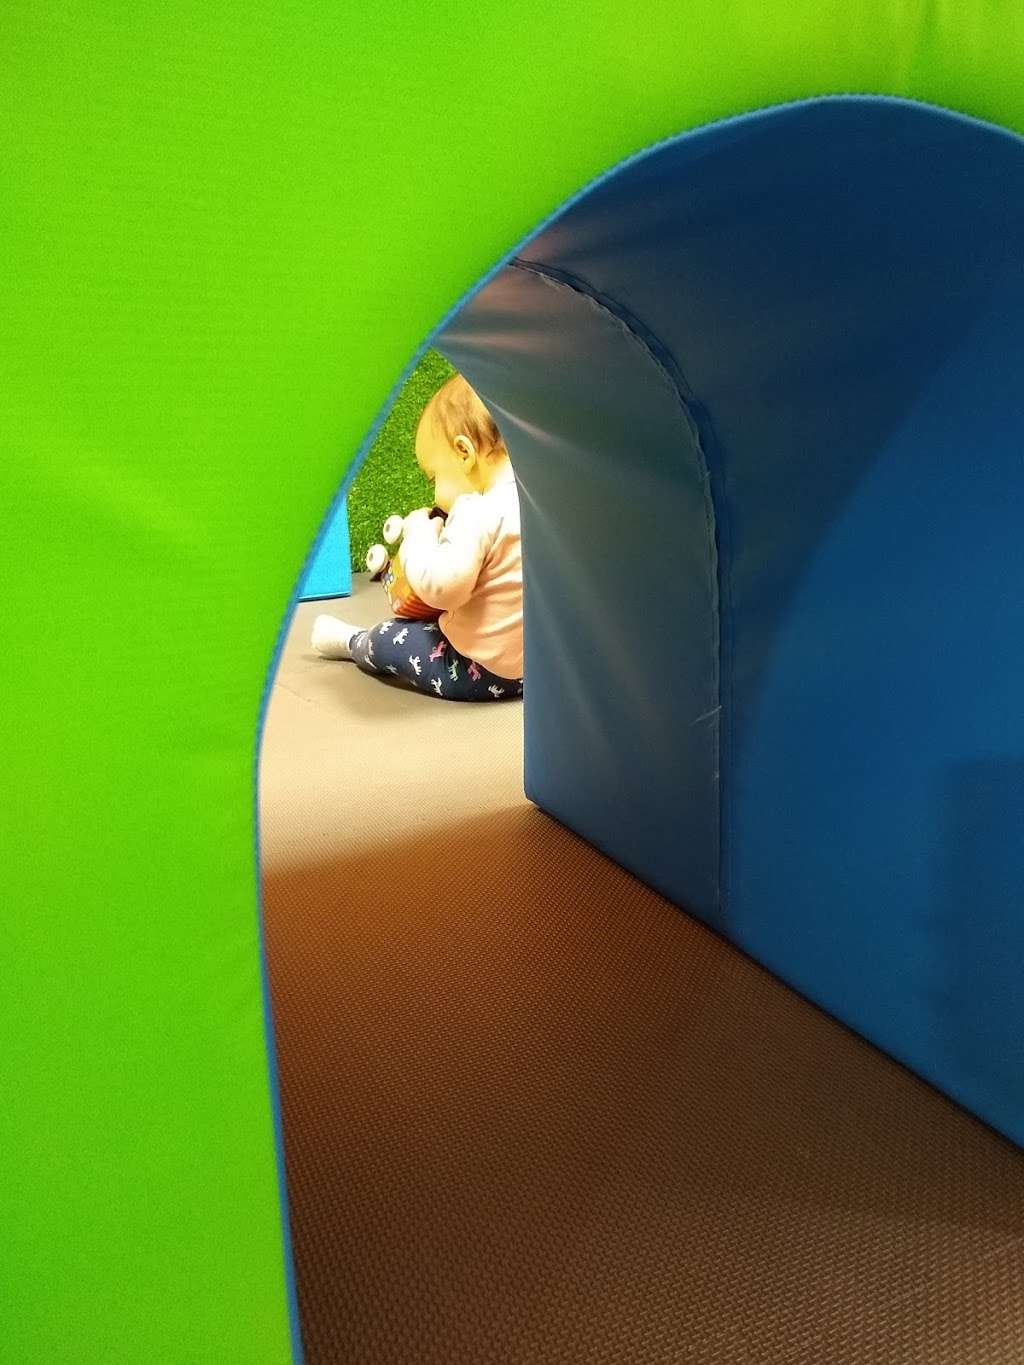 Little Land Play Gym & Pediatric Therapy - Katy | 610 Katy Fort Bend Rd Suite 270, Katy, TX 77494 | Phone: (281) 786-4899